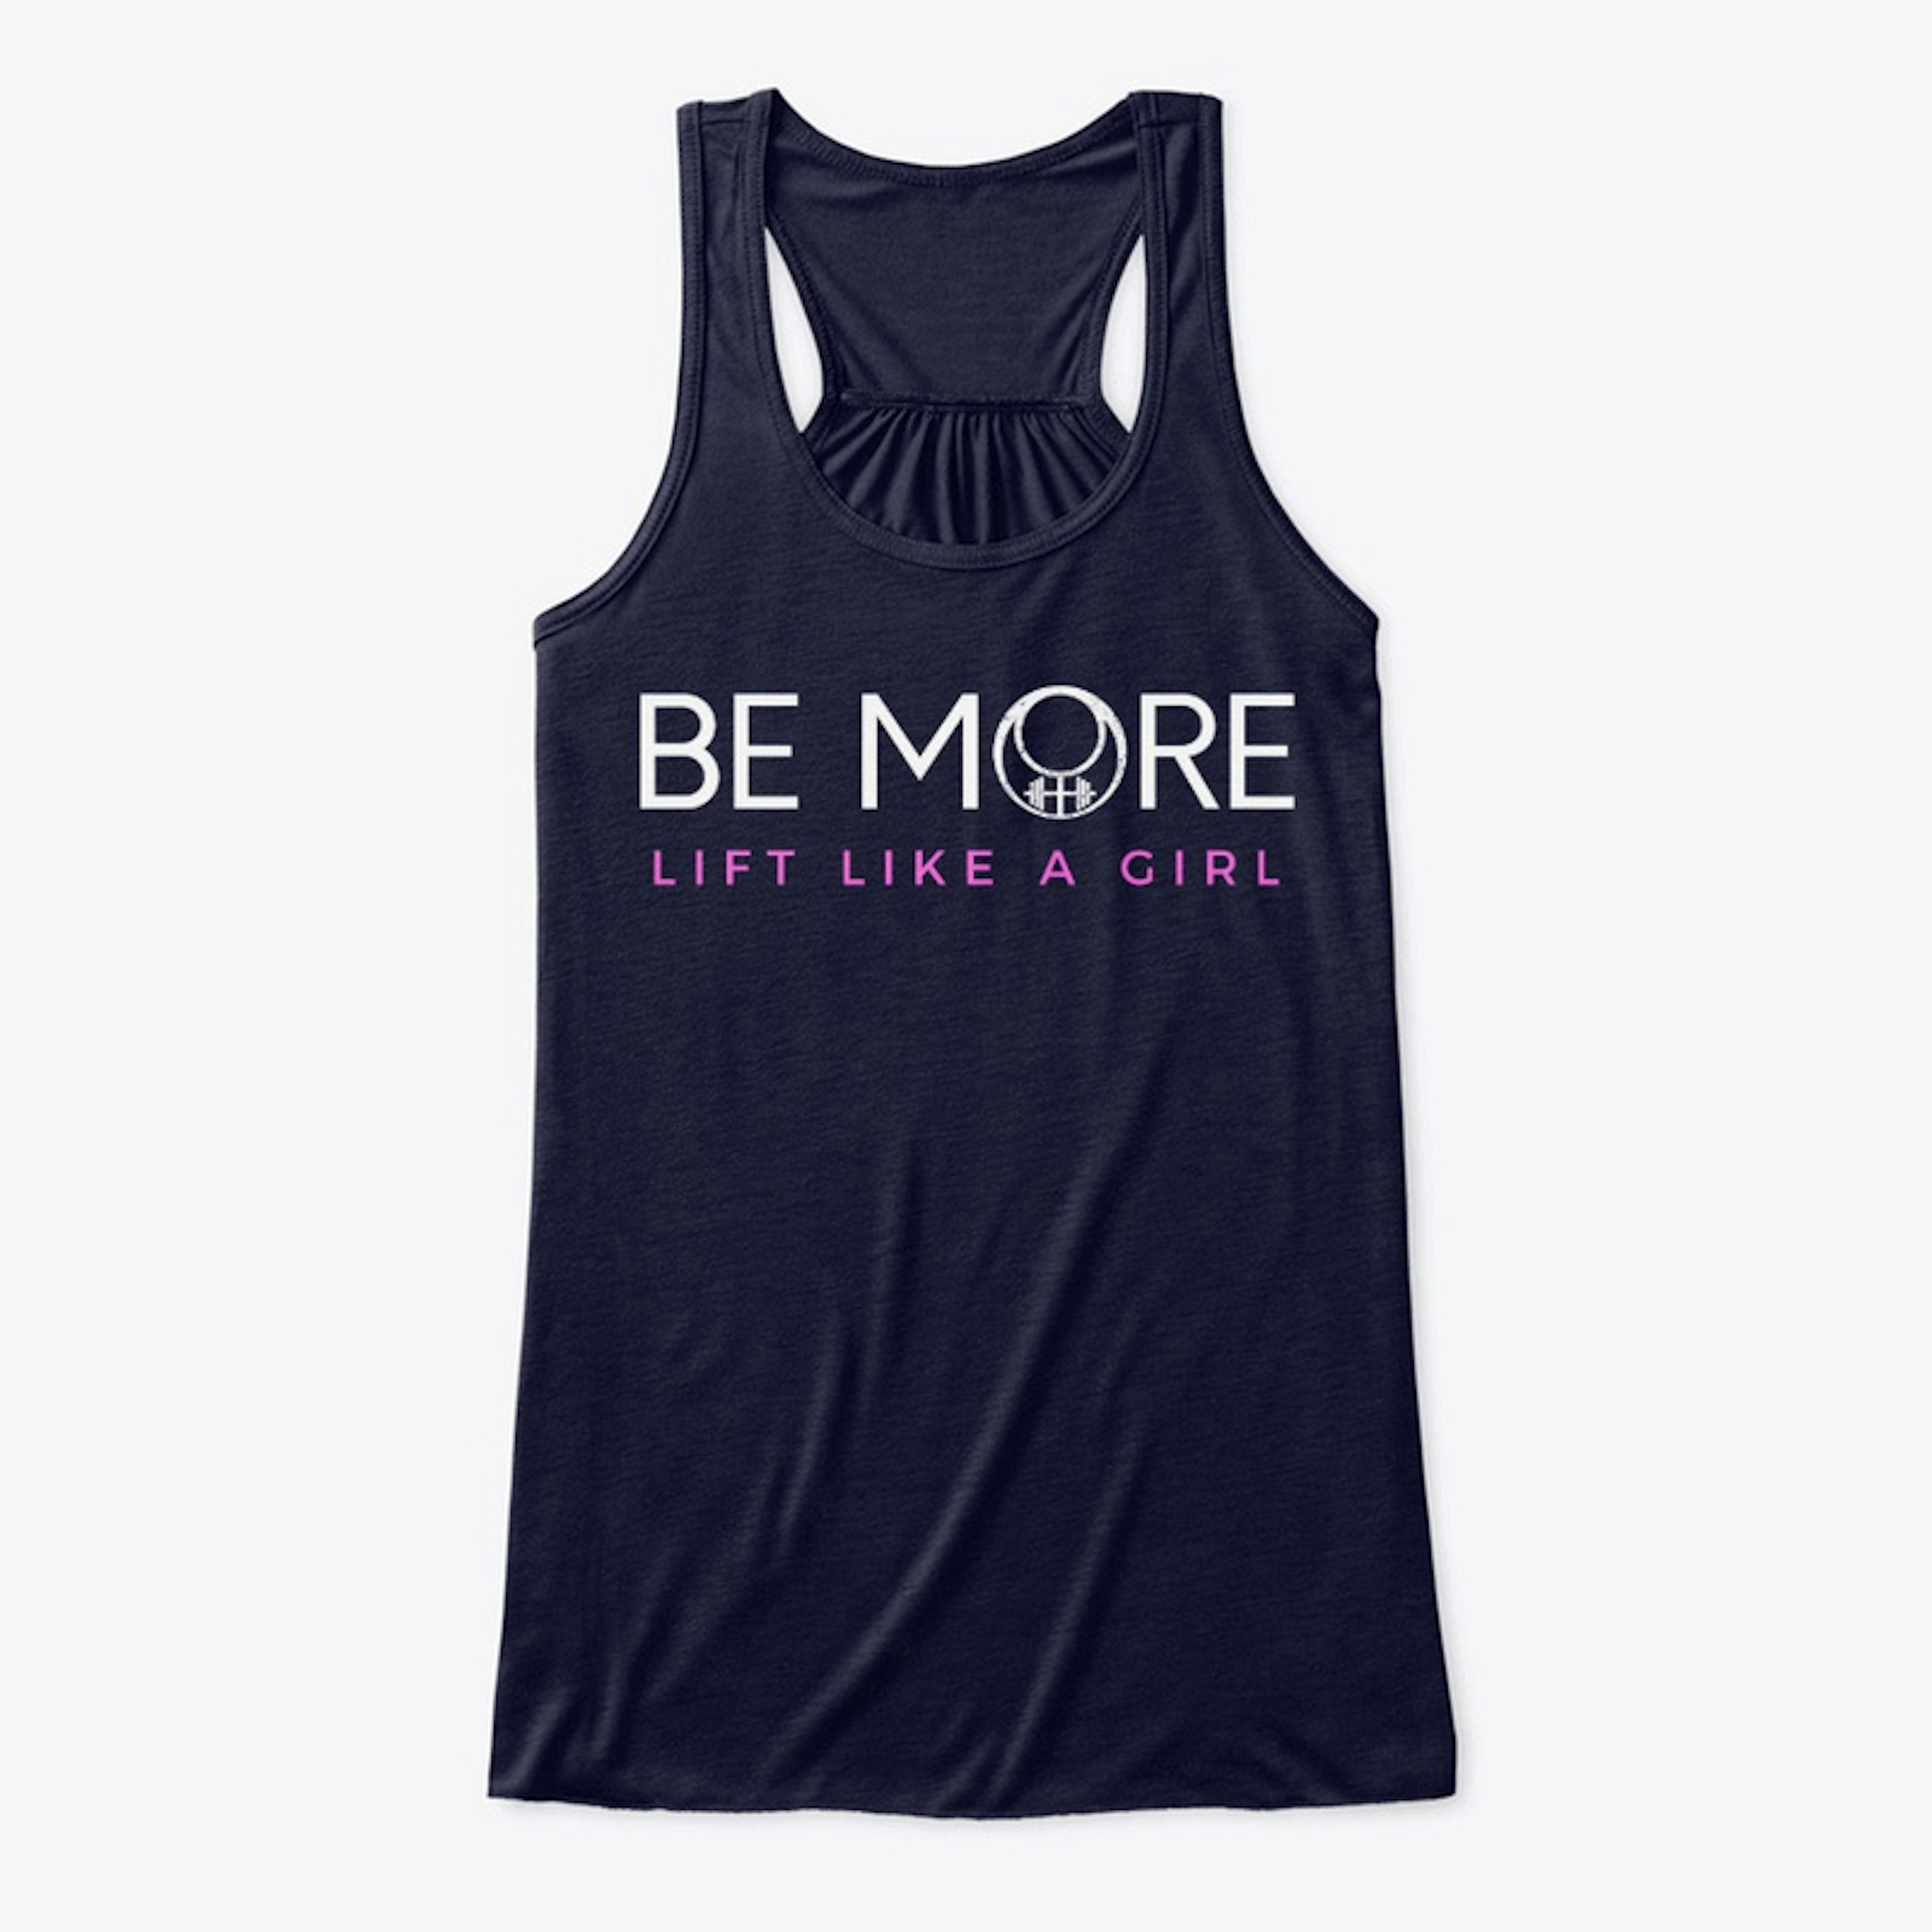 Be More: Lift Like a Girl!